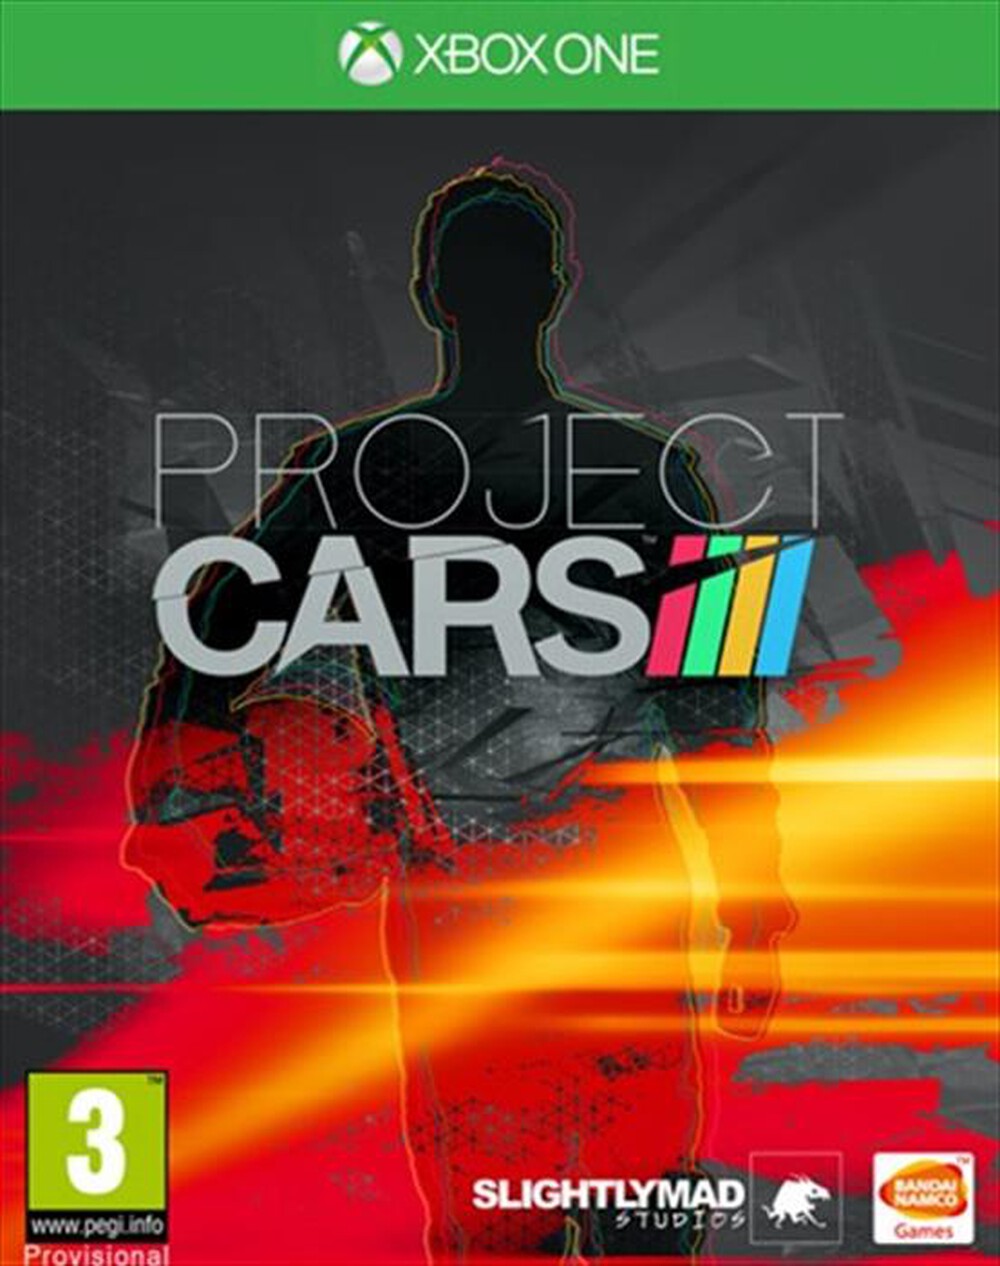 "NAMCO - Project Cars Xbox One"